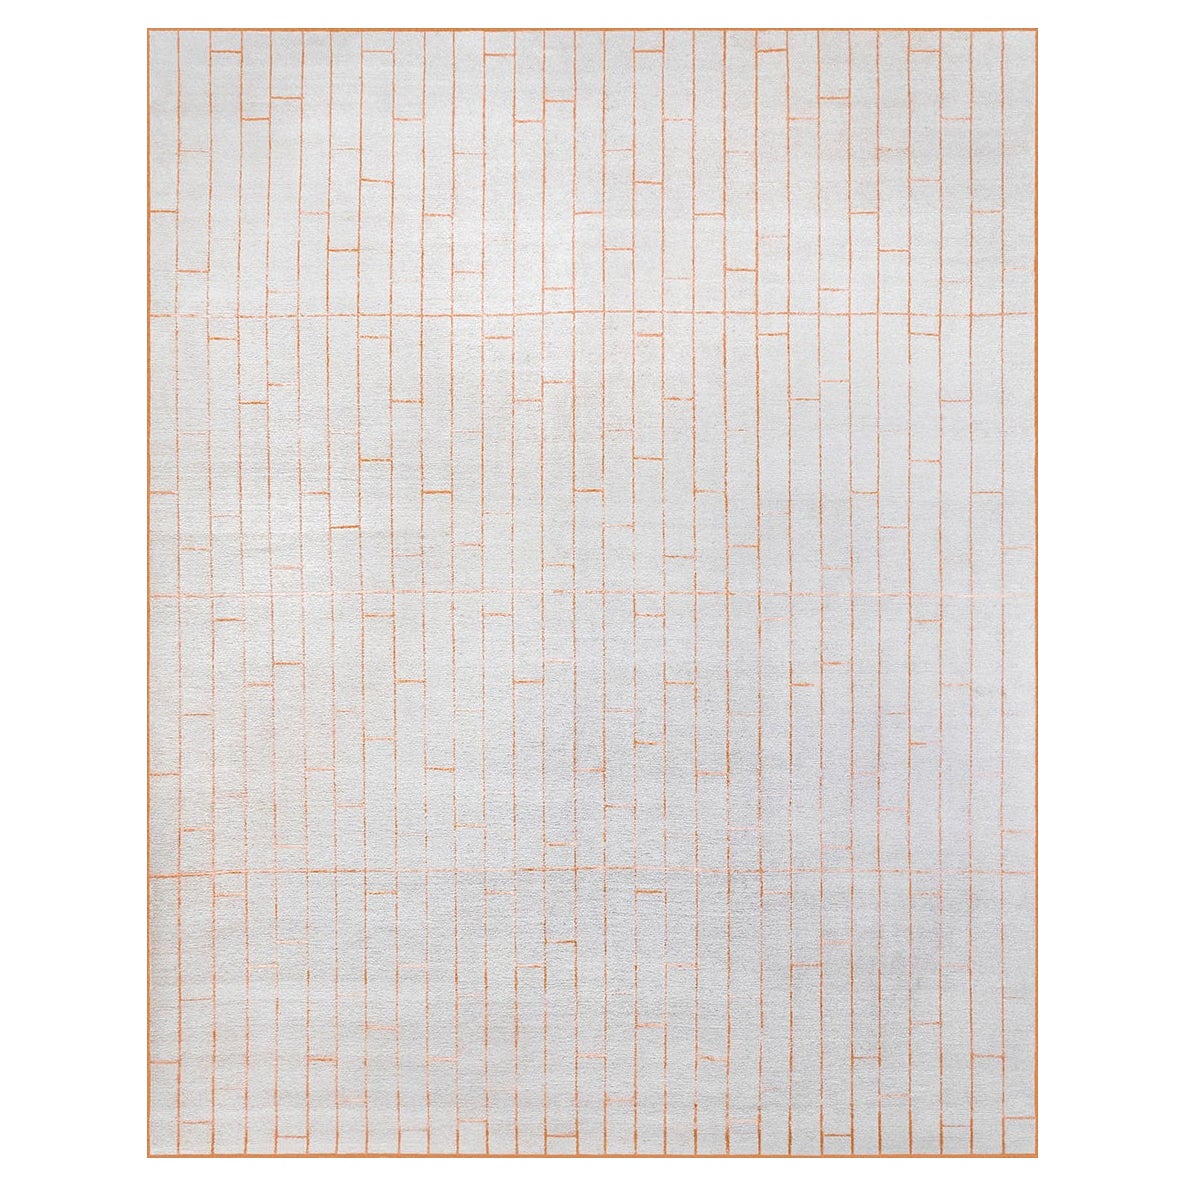 "Foundation - Blush + Taupe" /  9' x 12' / Hand-Knotted Wool + Silk Rug